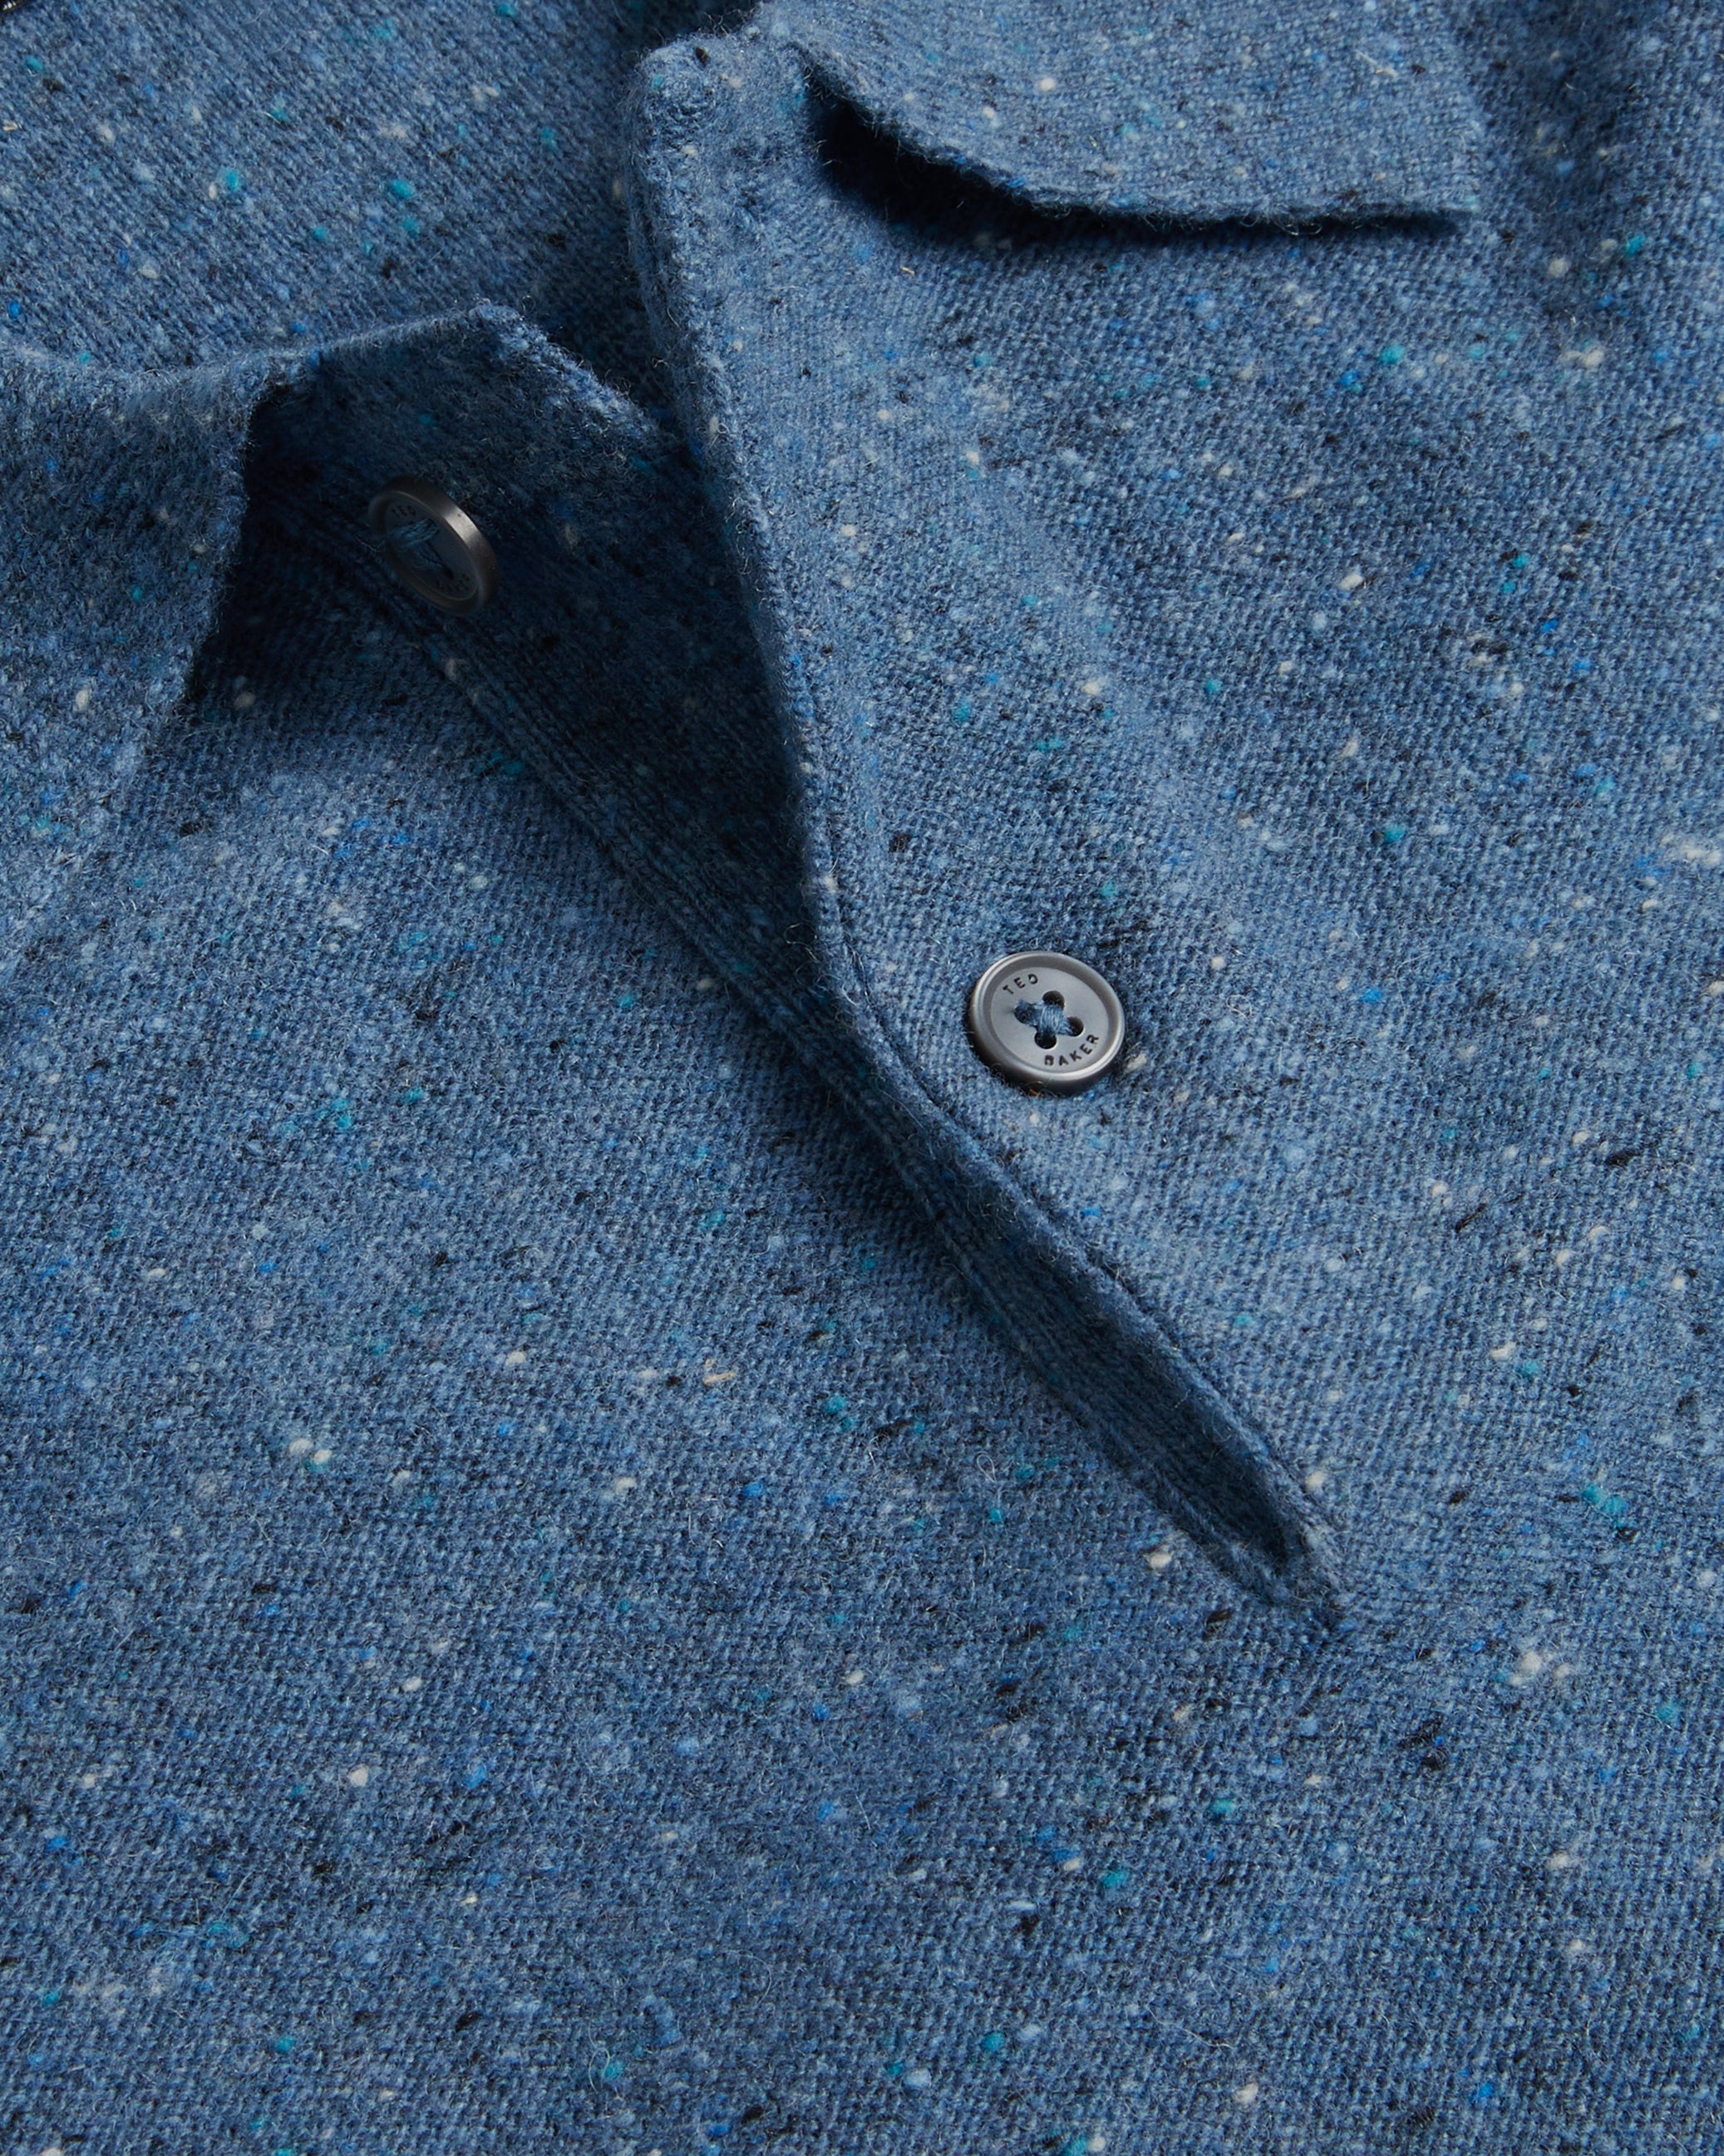 Ustee Marled Polo Shirt With Cable Knit Mid-Blue